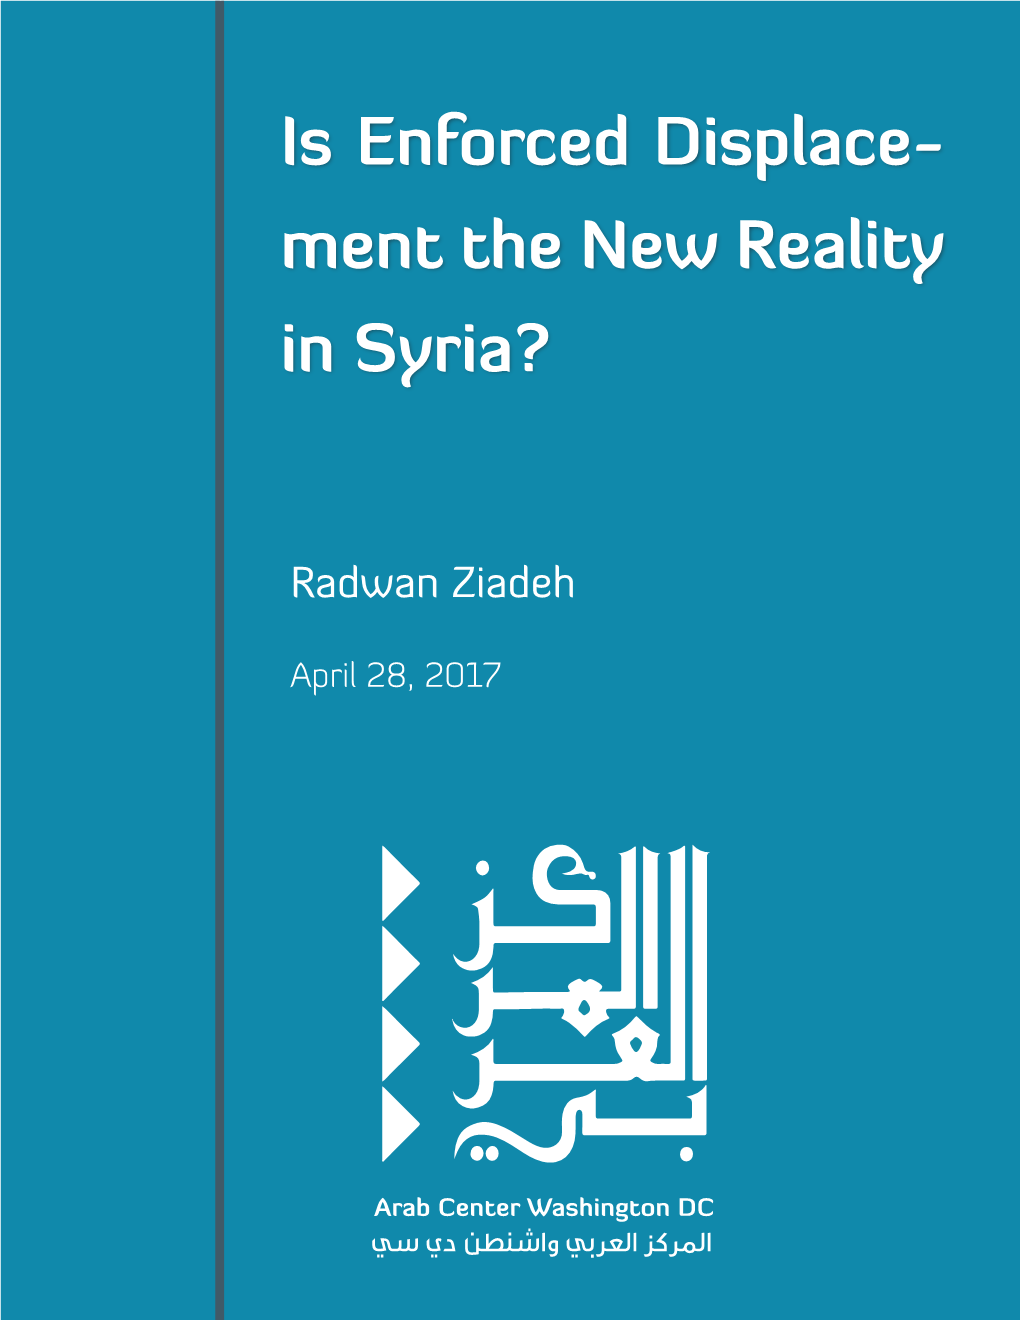 Is Enforced Displace- Ment the New Reality in Syria?